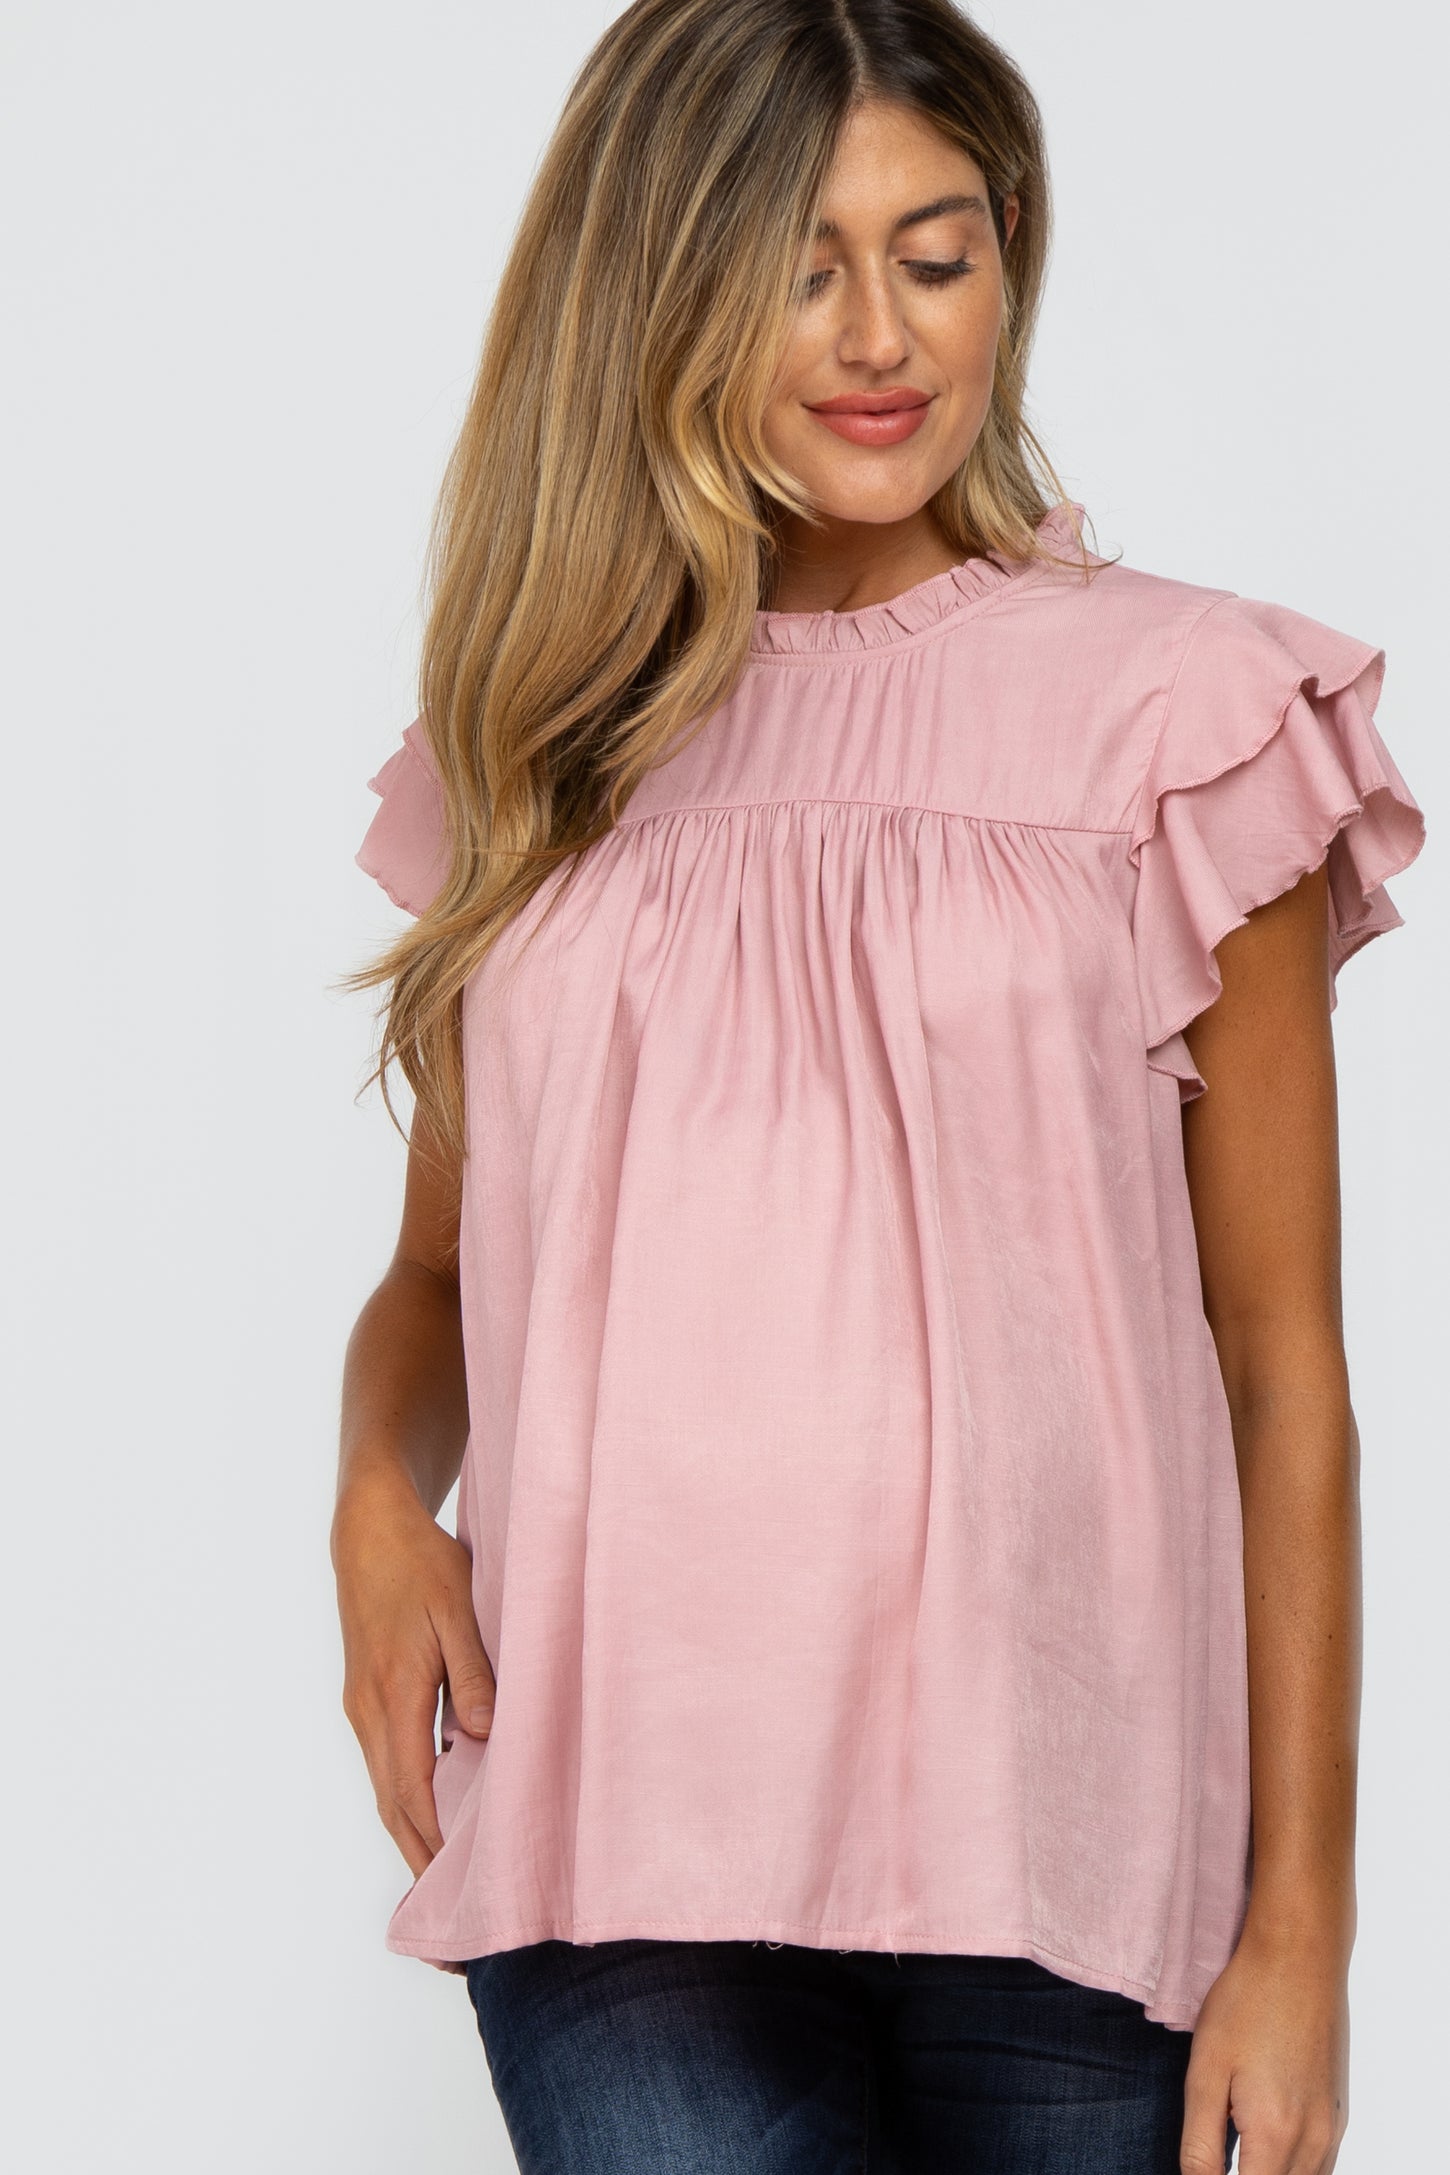 Pink Ruffle Accent Maternity Blouse